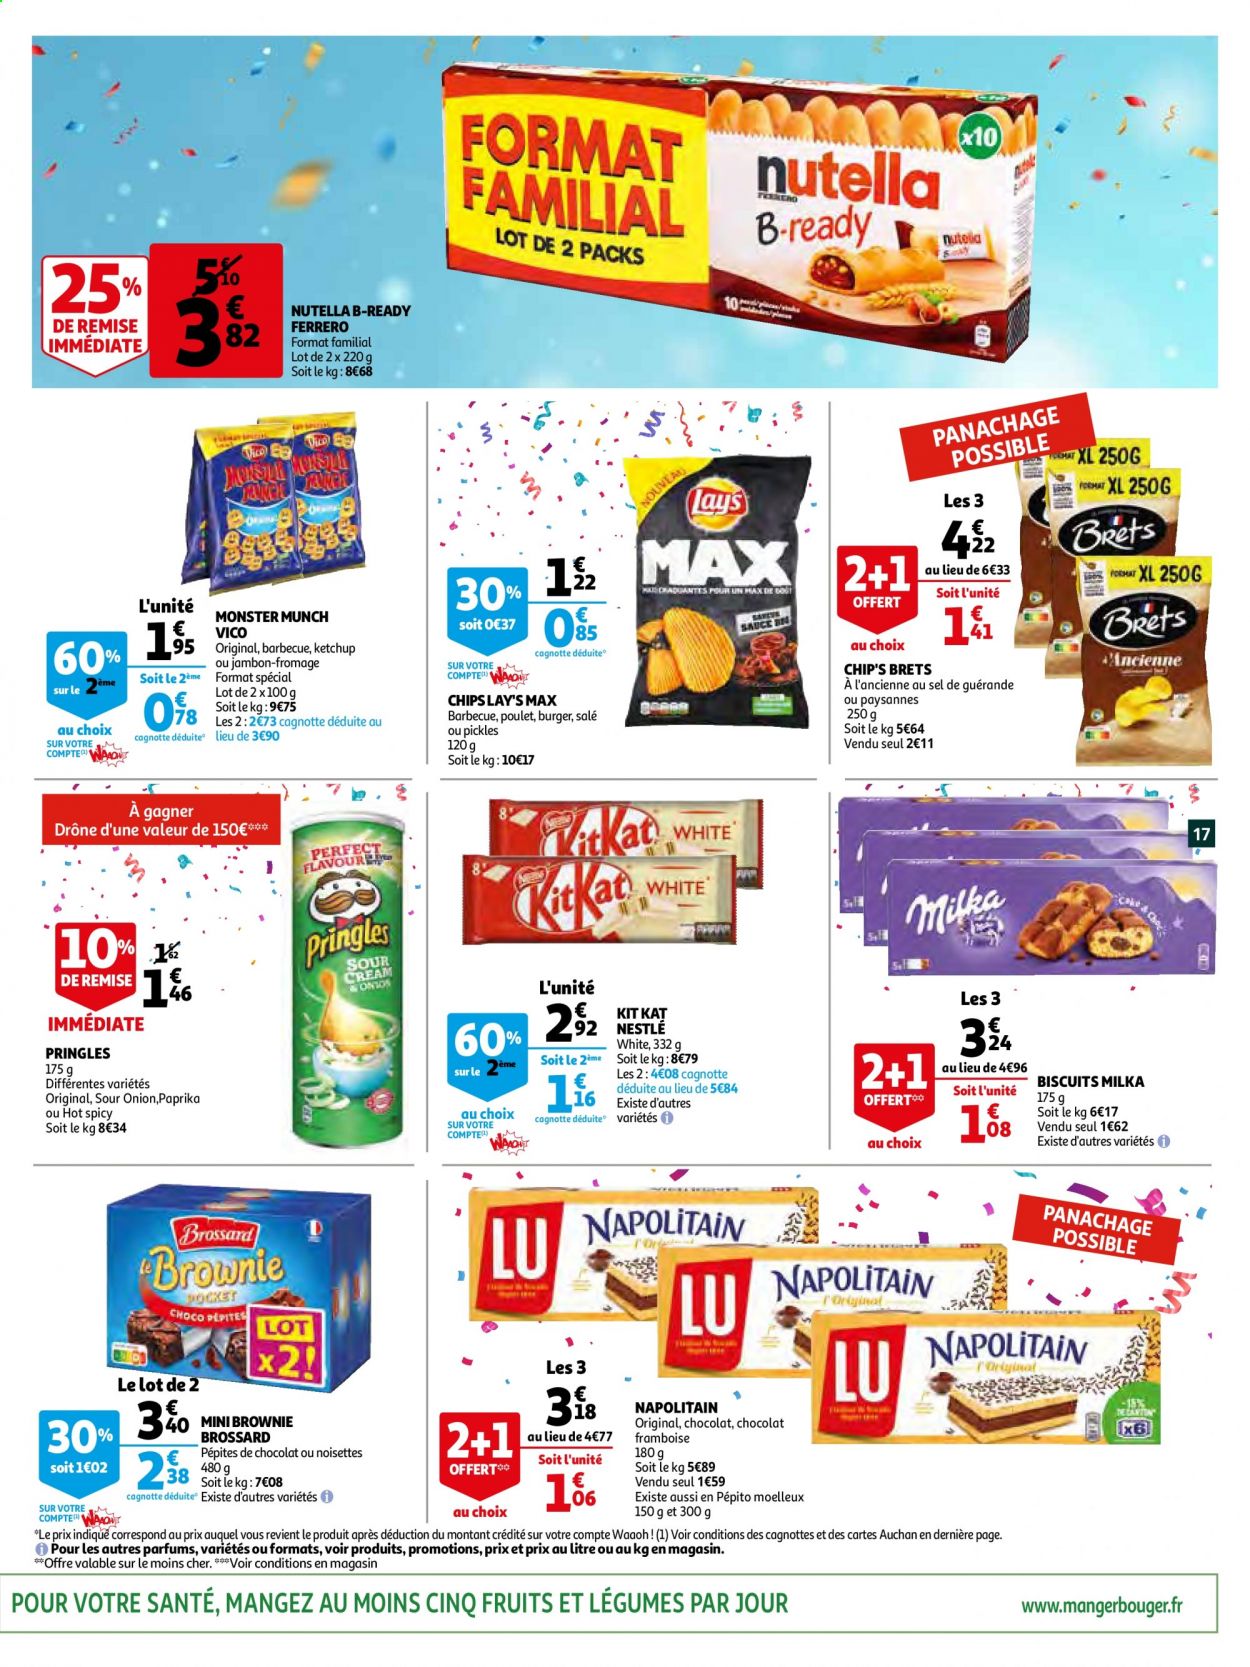 thumbnail - Catalogue Auchan - 06/04/2021 - 13/04/2021 - Produits soldés - brownie, fromage, Nestlé, Milka, Napolitain, Nutella, Brossard, KitKat, chips, Vico, Pringles, Lay’s, Brets, Monster Munch, Monster, drone. Page 17.